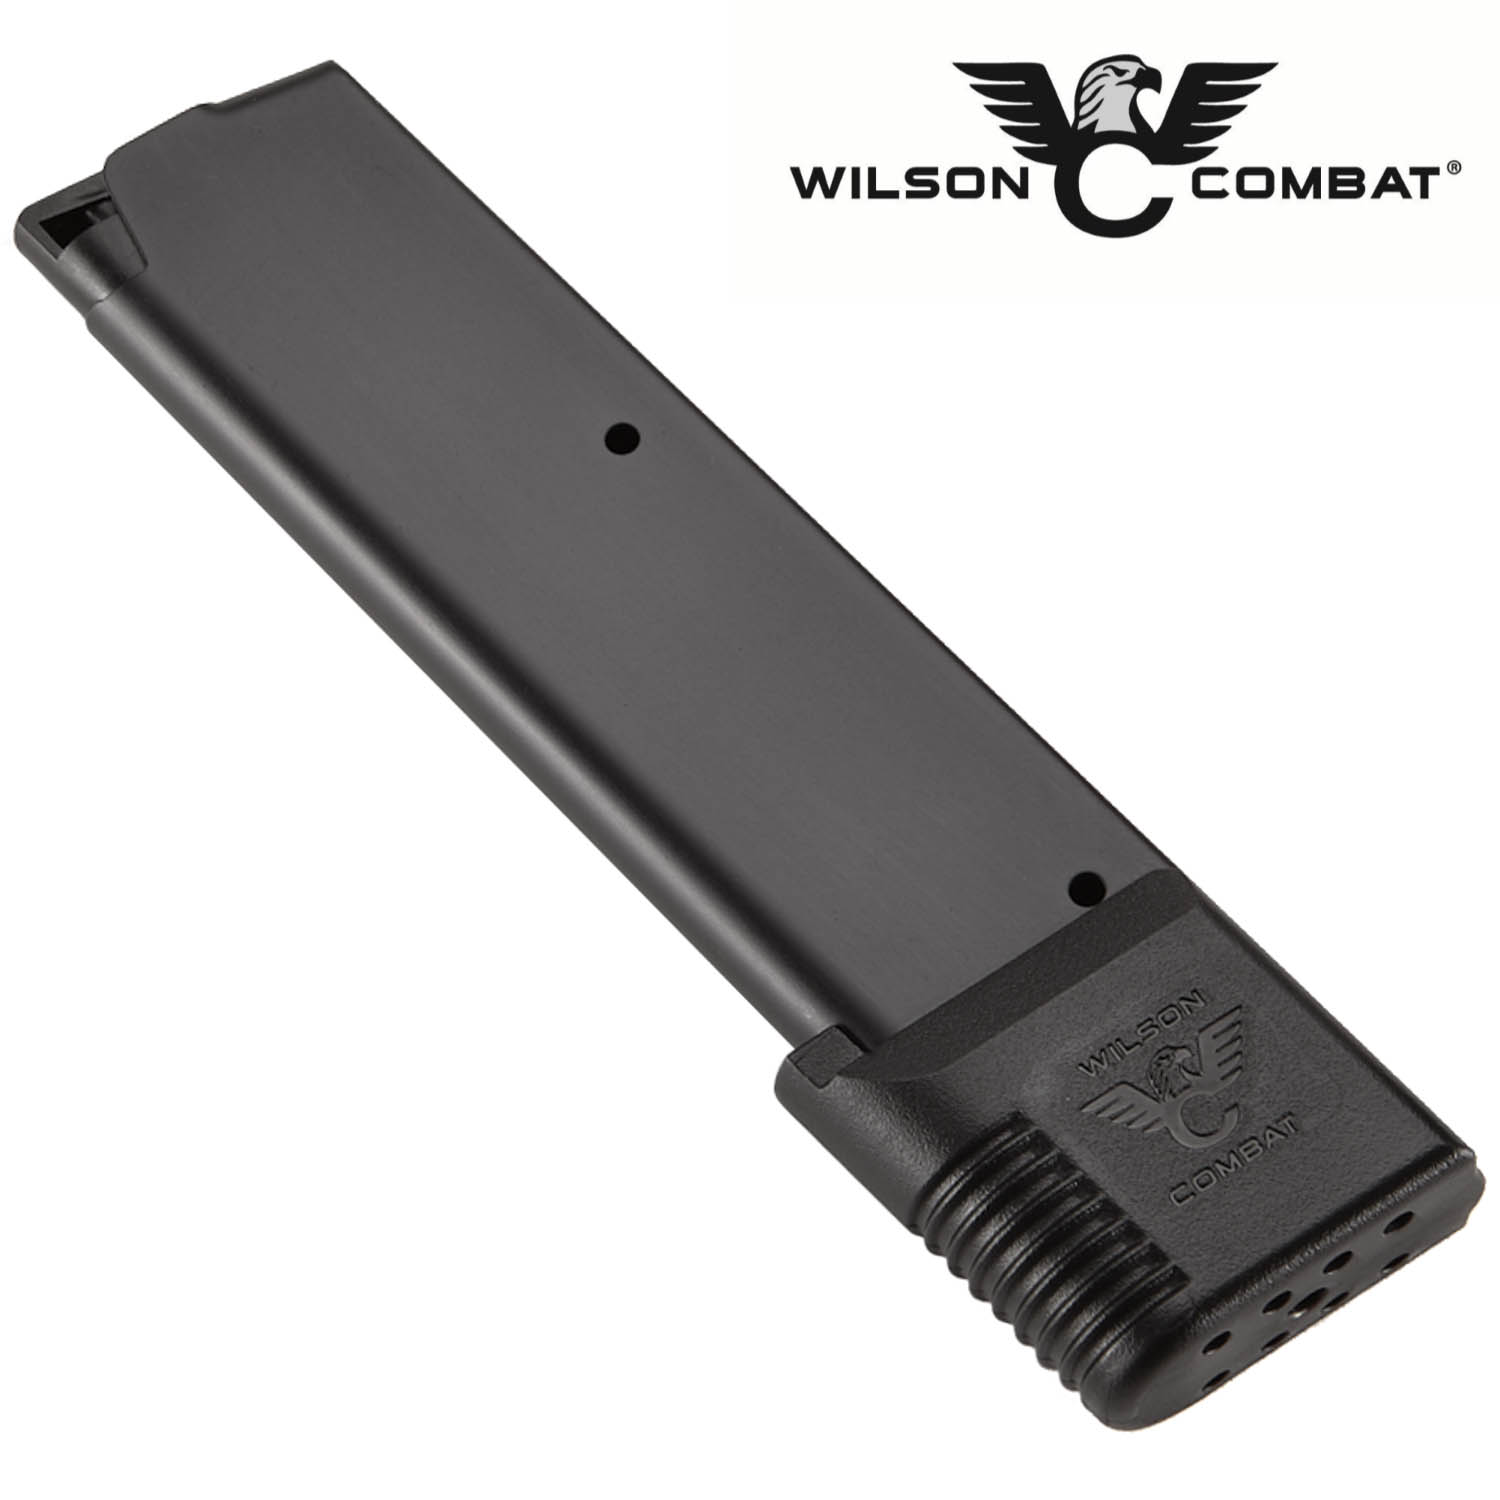 Wilson Combat 1911 10 Round Magazine Full-Size .45 ACP with Wrap-Around Base Pad for sale online 